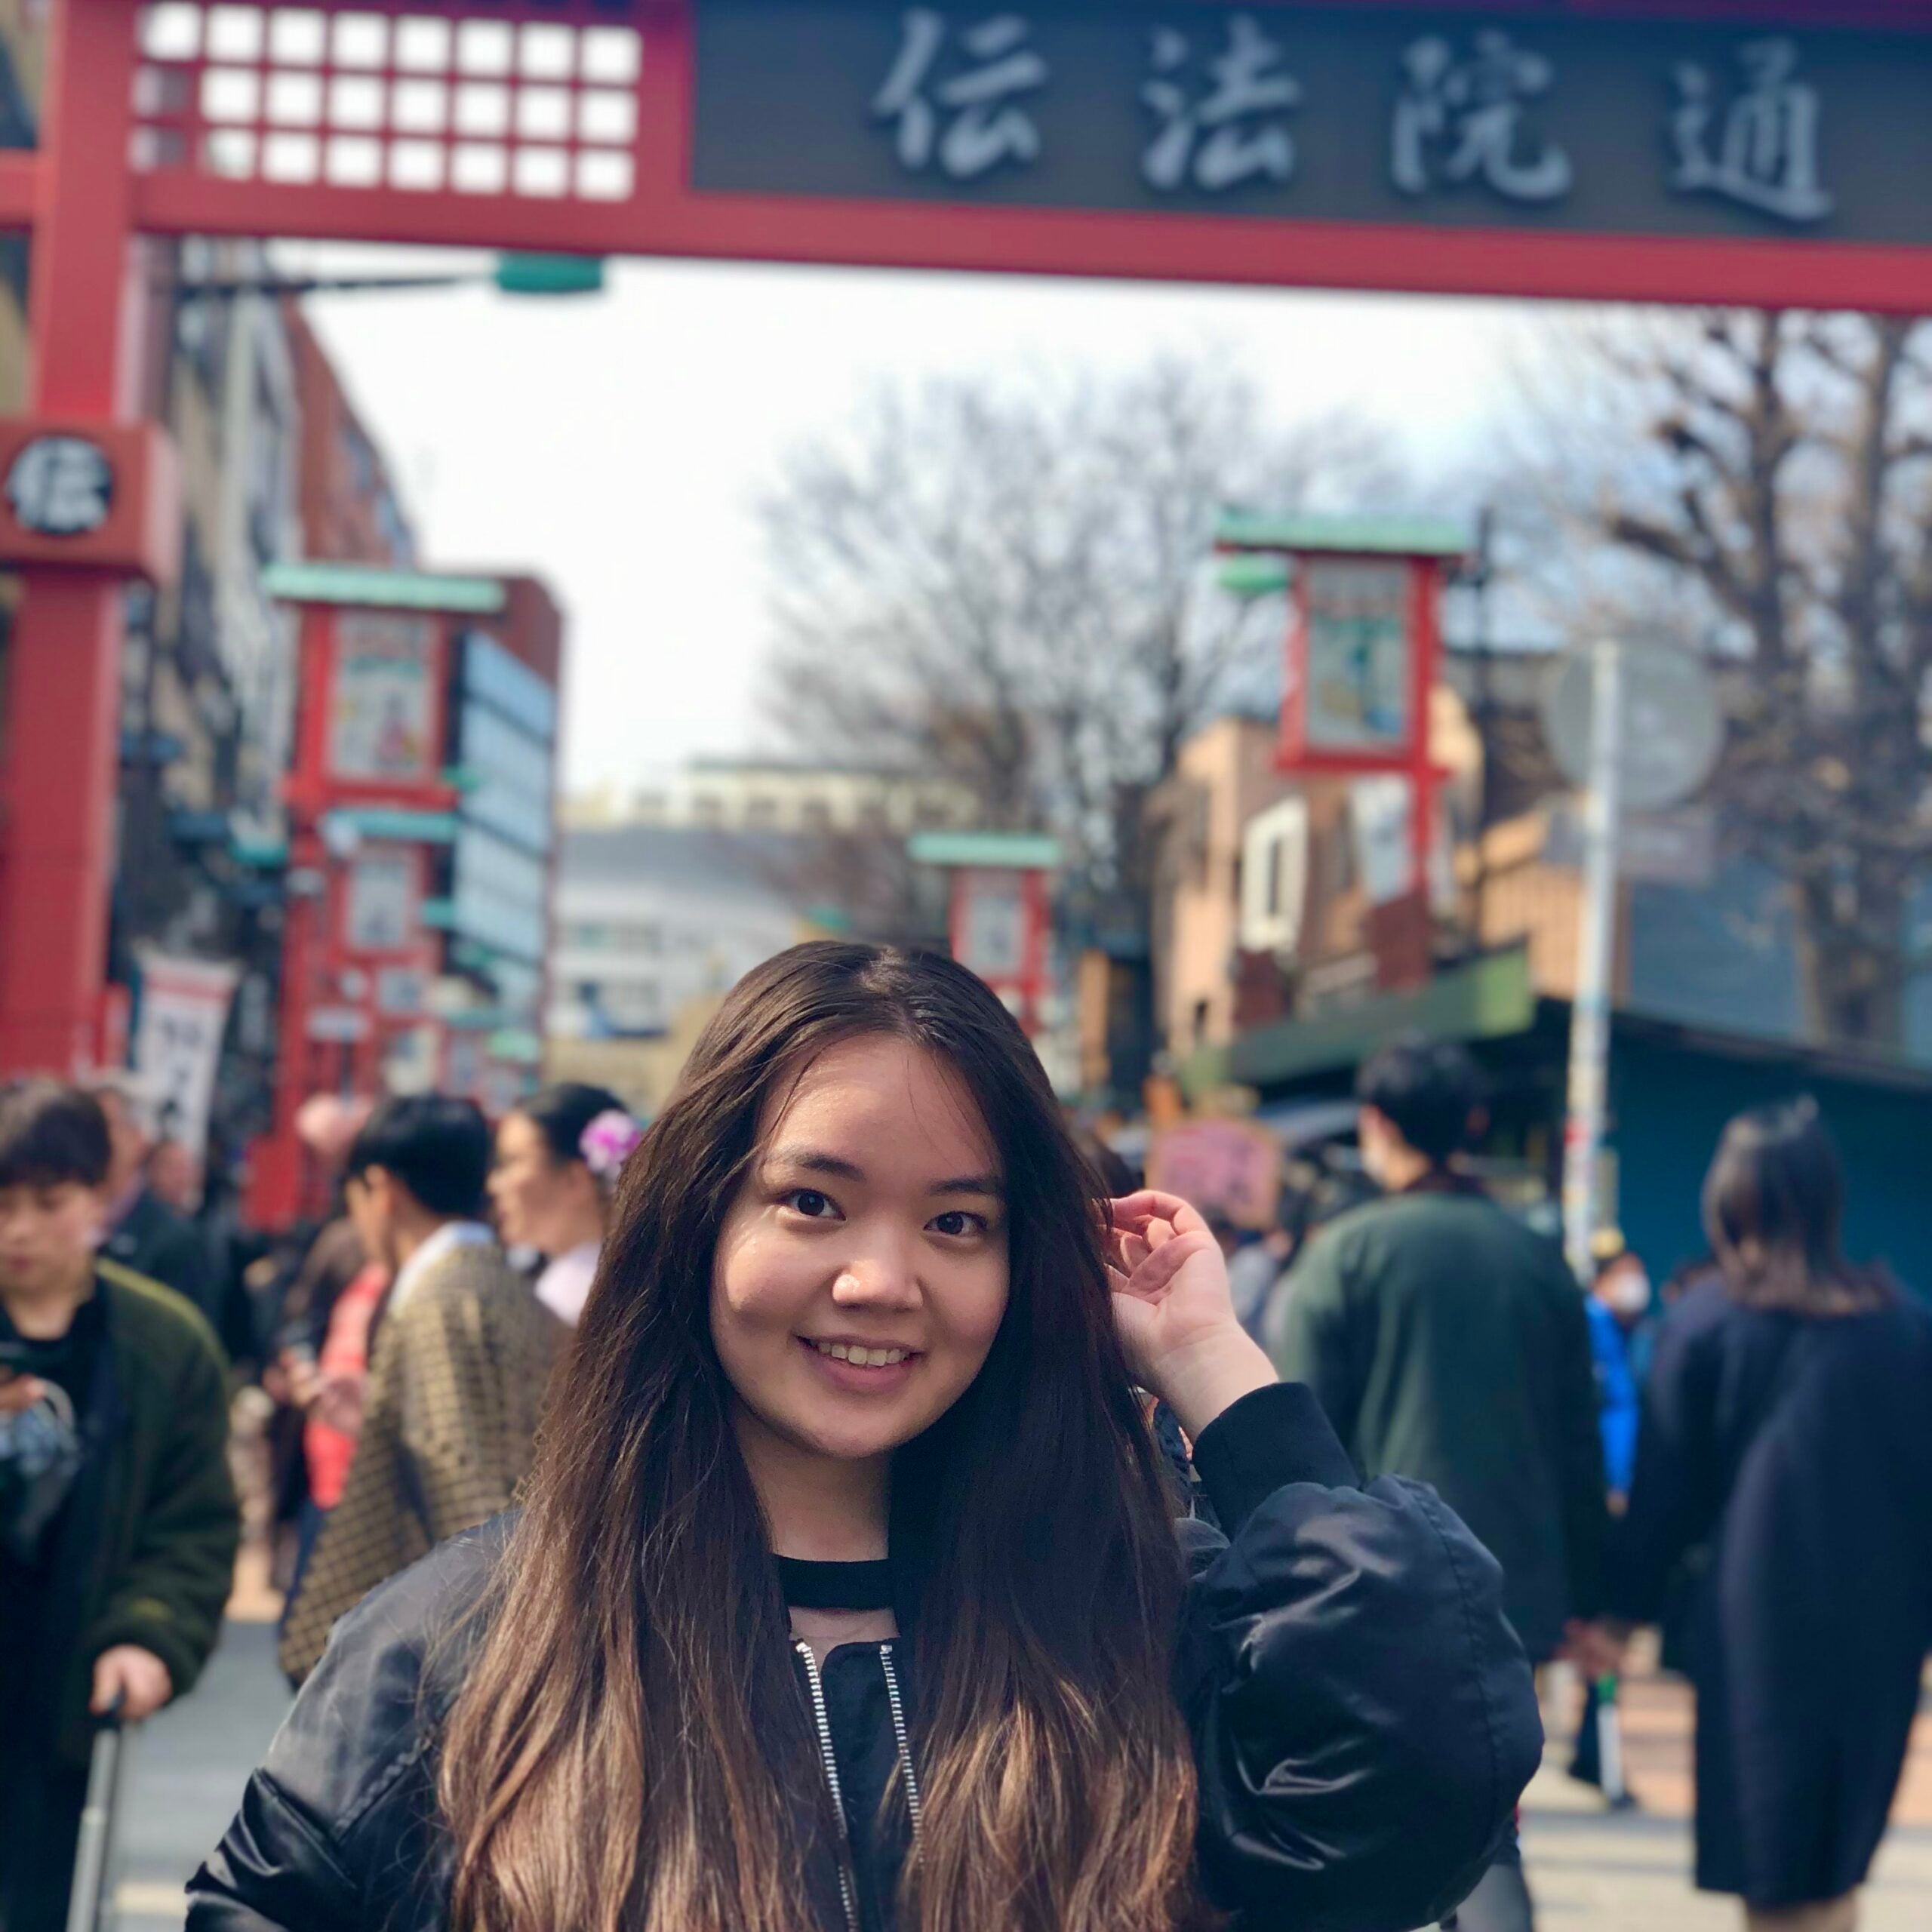 Astiya smiles at the camera and plays with her hair in front of a red gate. Other city-goers are visible behind her.